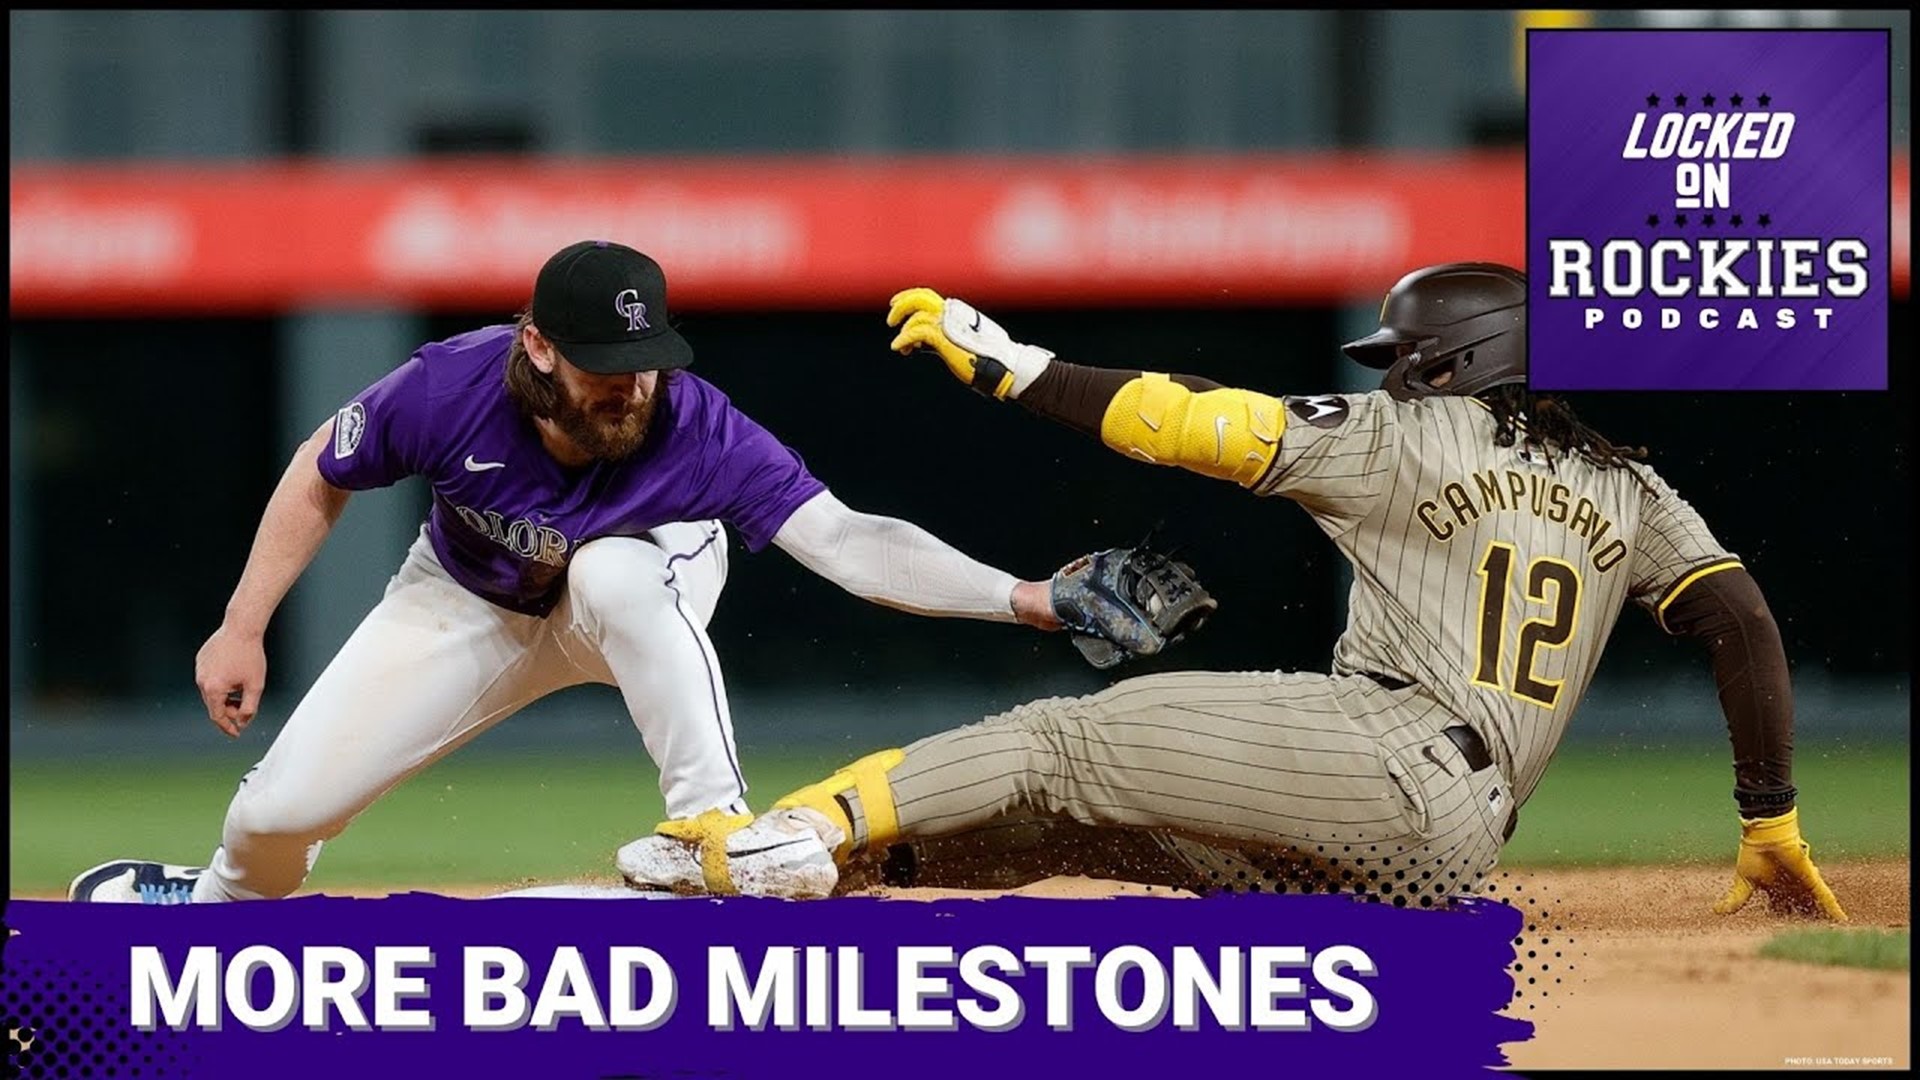 There are too many examples of the Colorado Rockies being on the wrong side of history and it didn't improve last night.